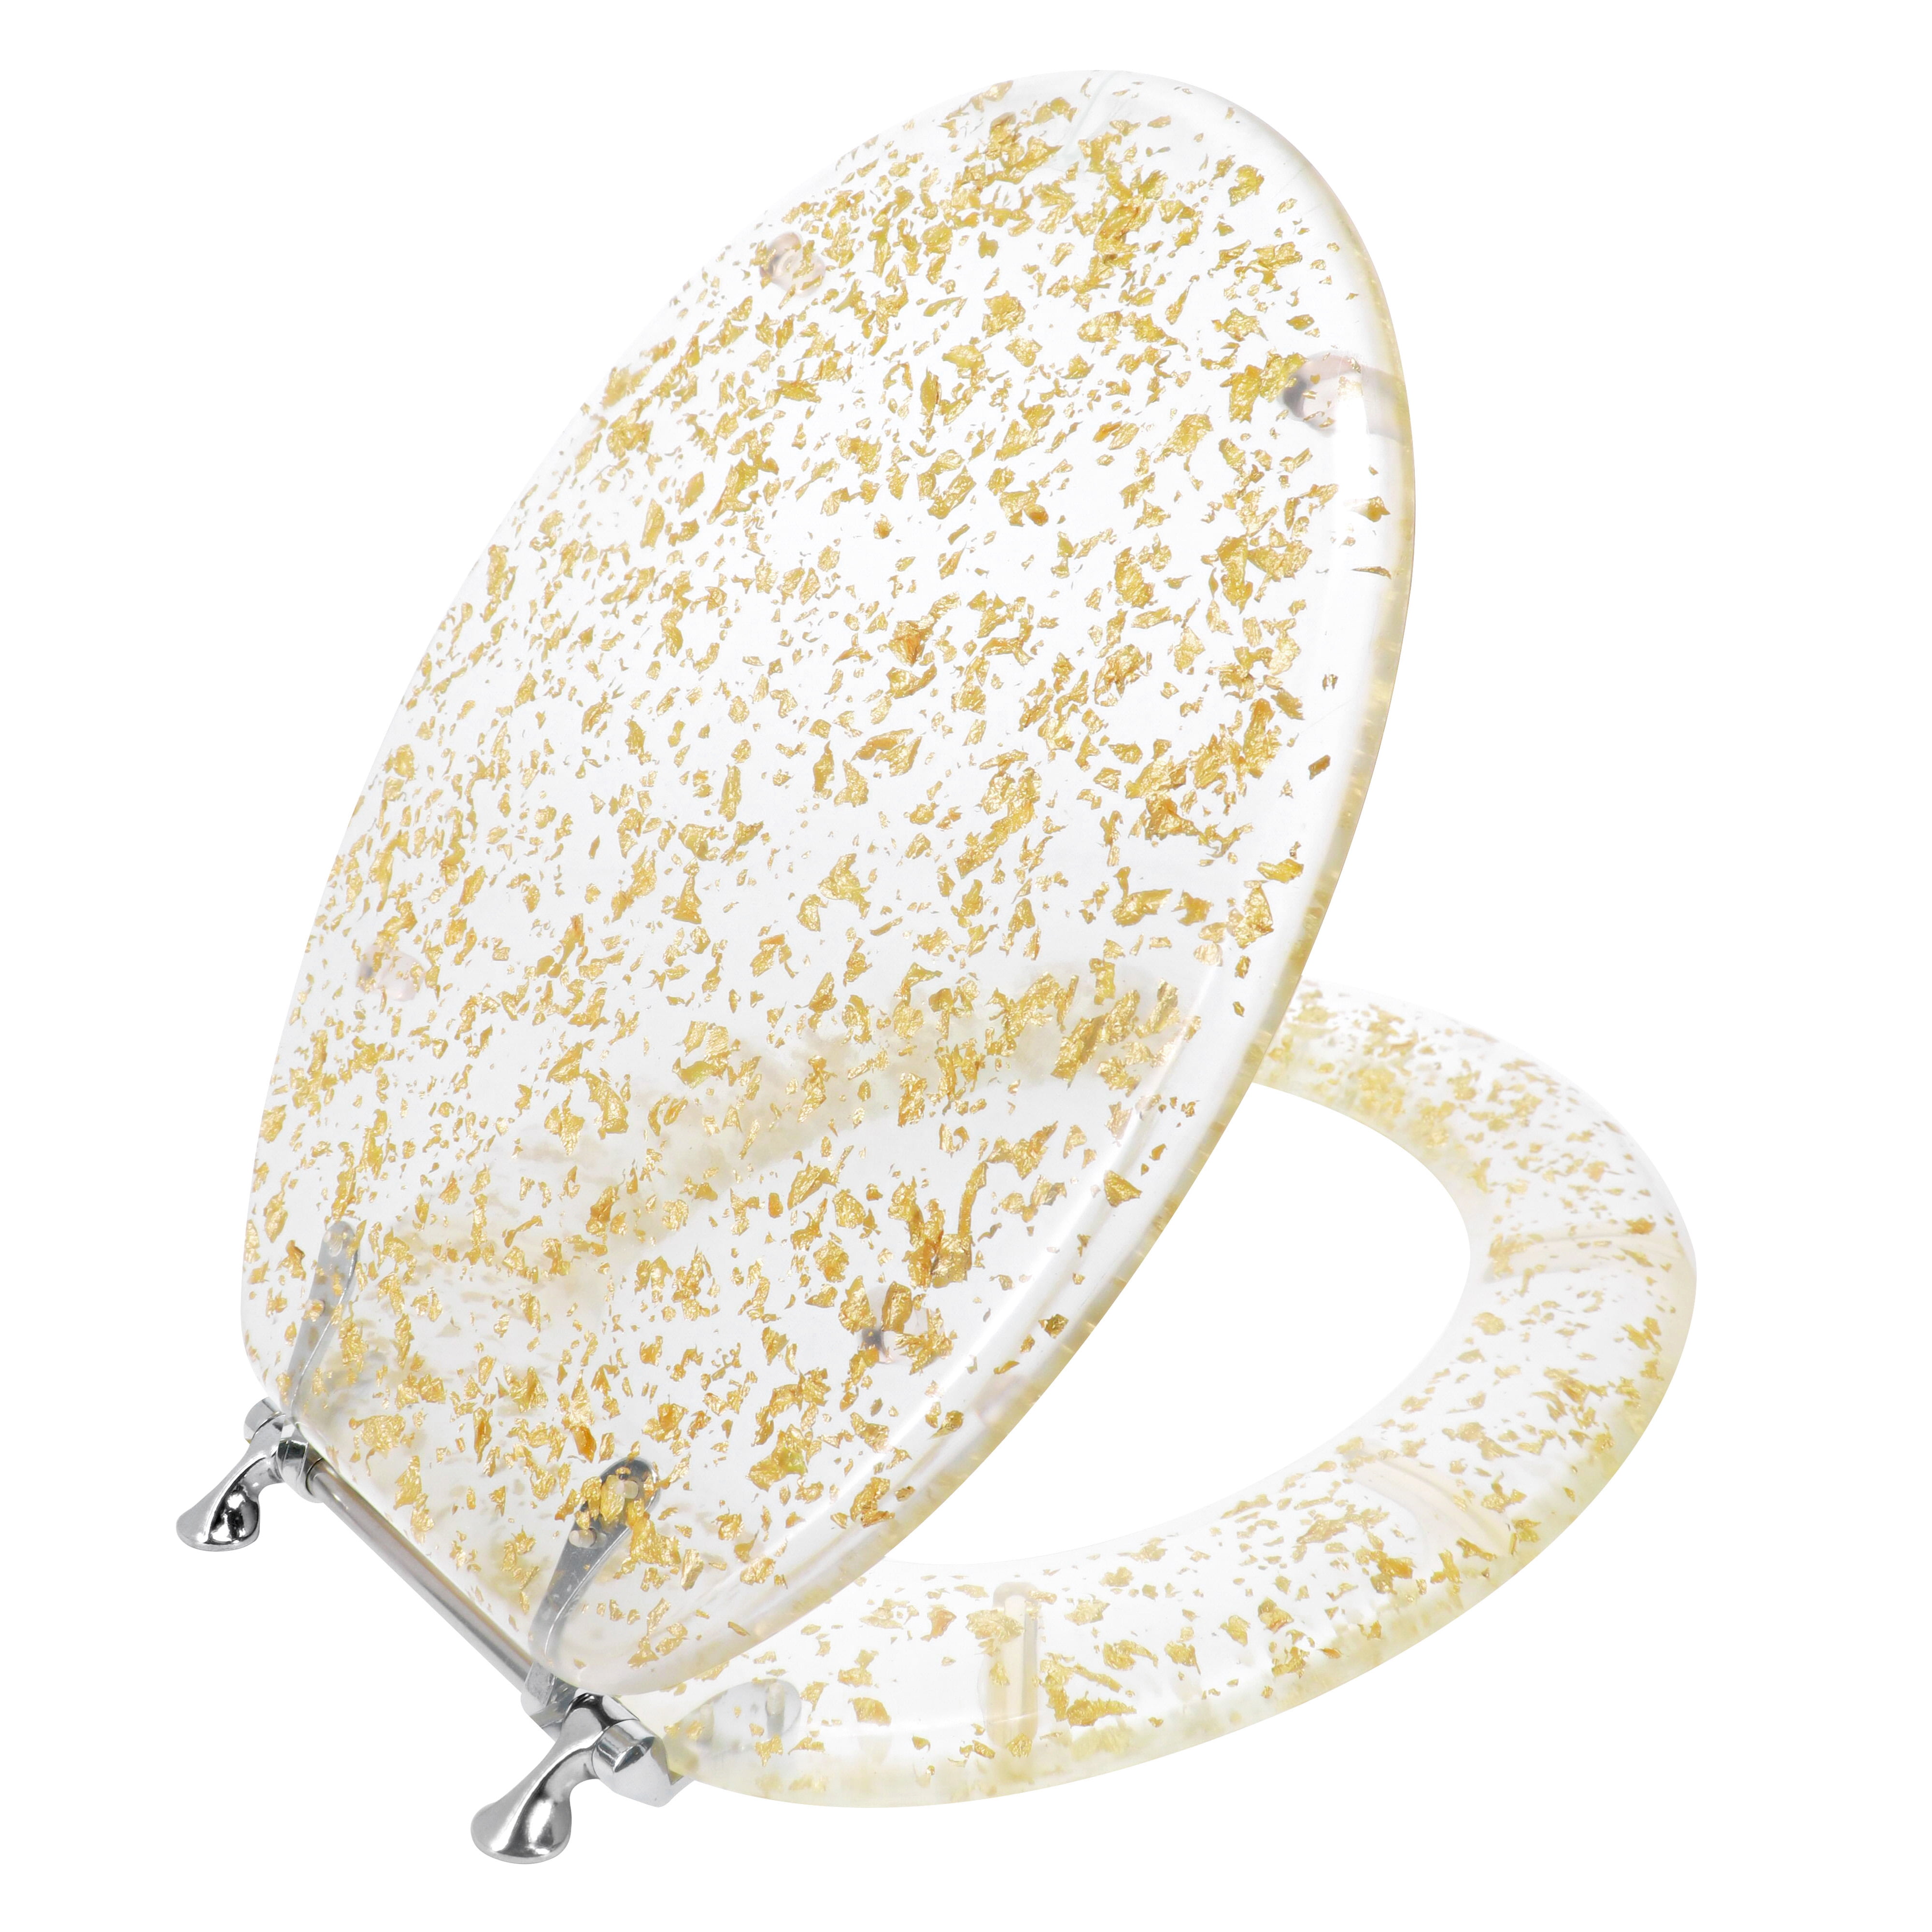 GOLD FOIL RESIN ACRYLIC TOILET SEAT ELONGATED ROUND WITH CHROME HINGES 